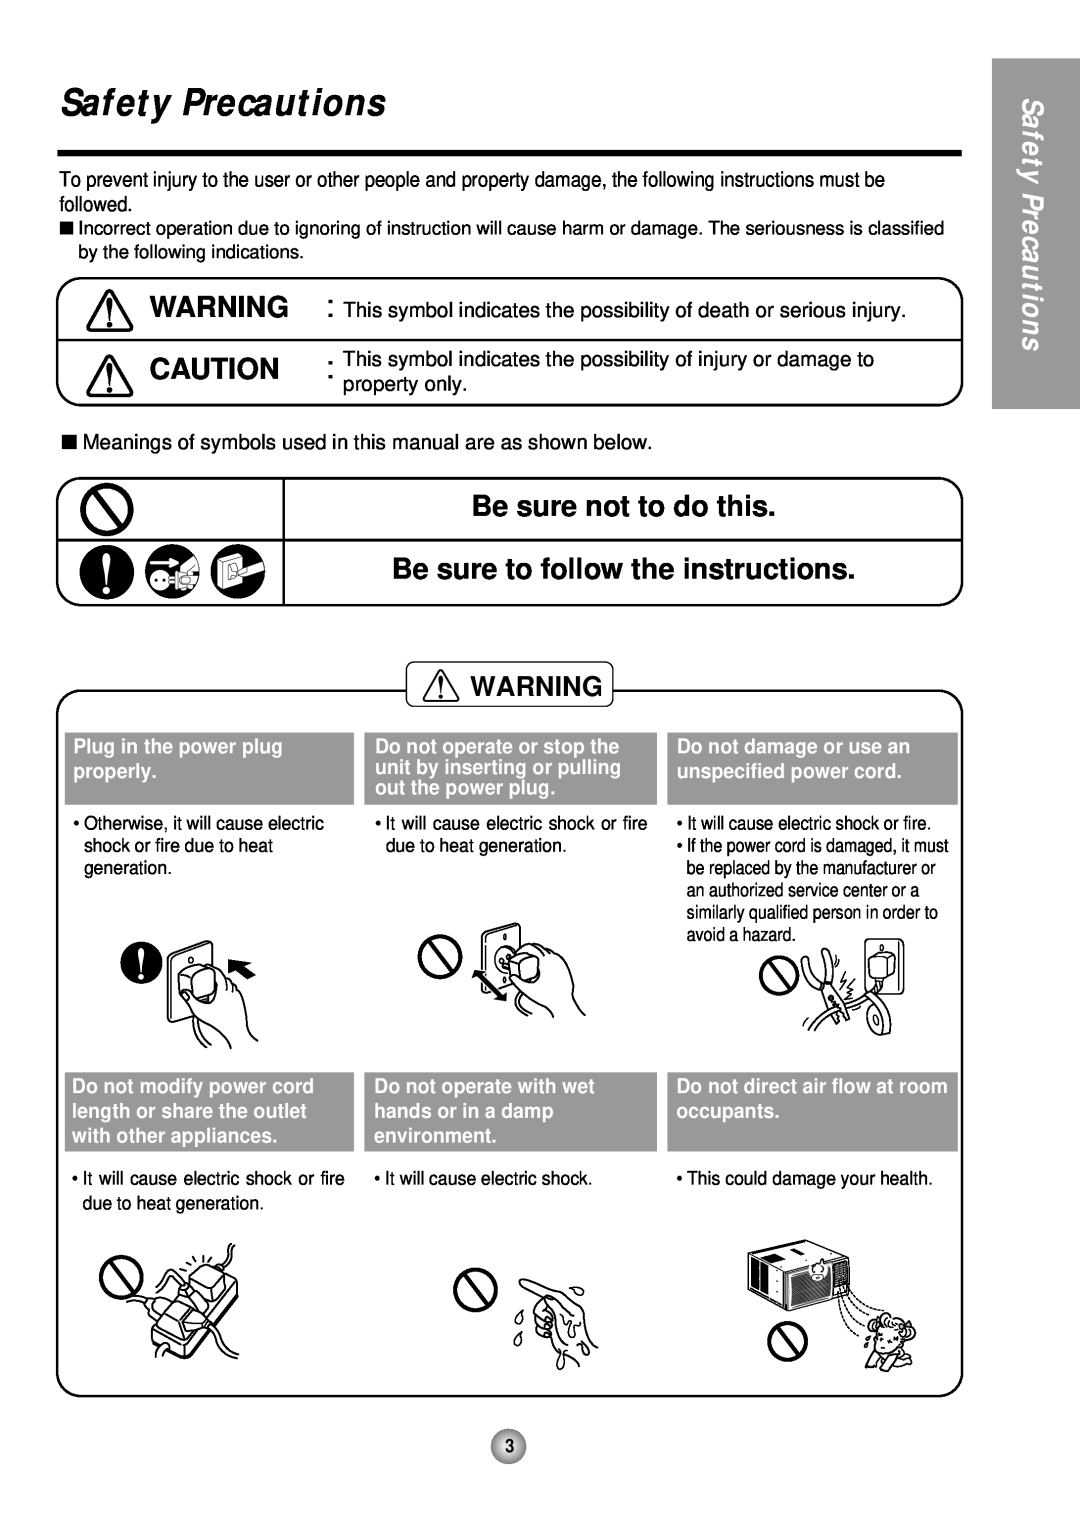 Panasonic CW-XC243HU Safety Precautions, Be sure not to do this, Be sure to follow the instructions, hands or in a damp 